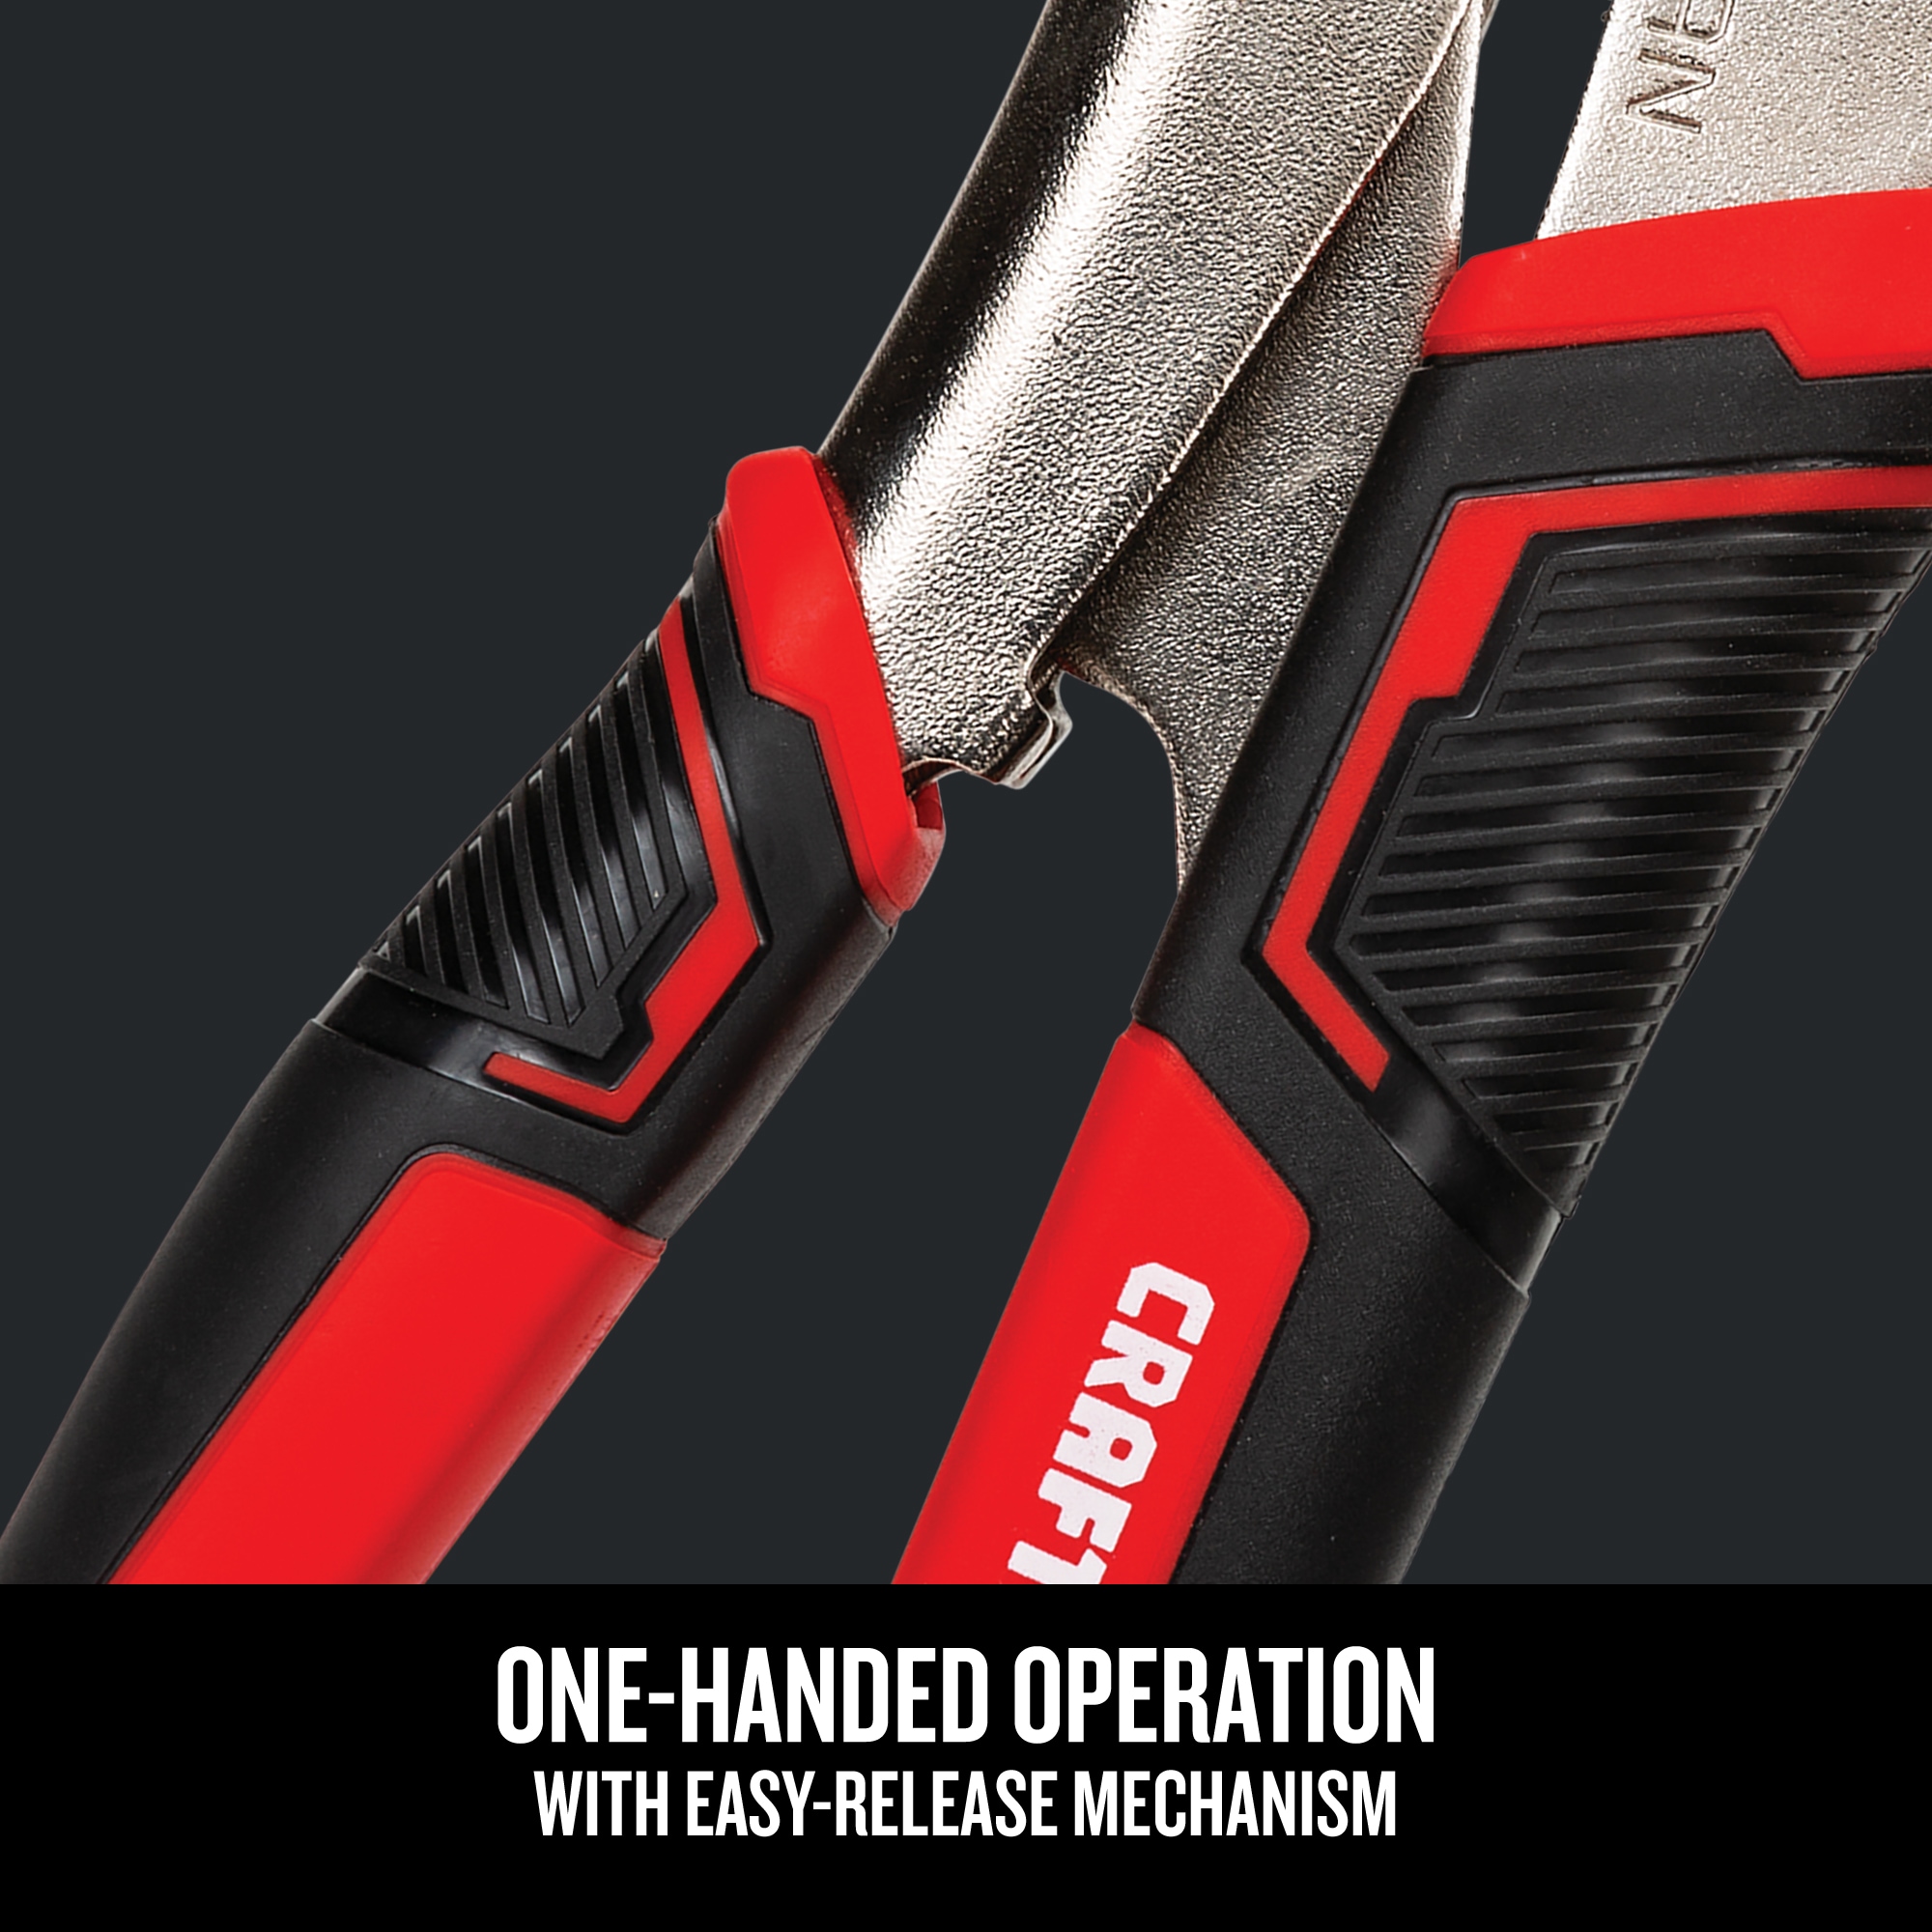 CRAFTSMAN 25-Pack Assorted Pliers in the Plier Sets department at